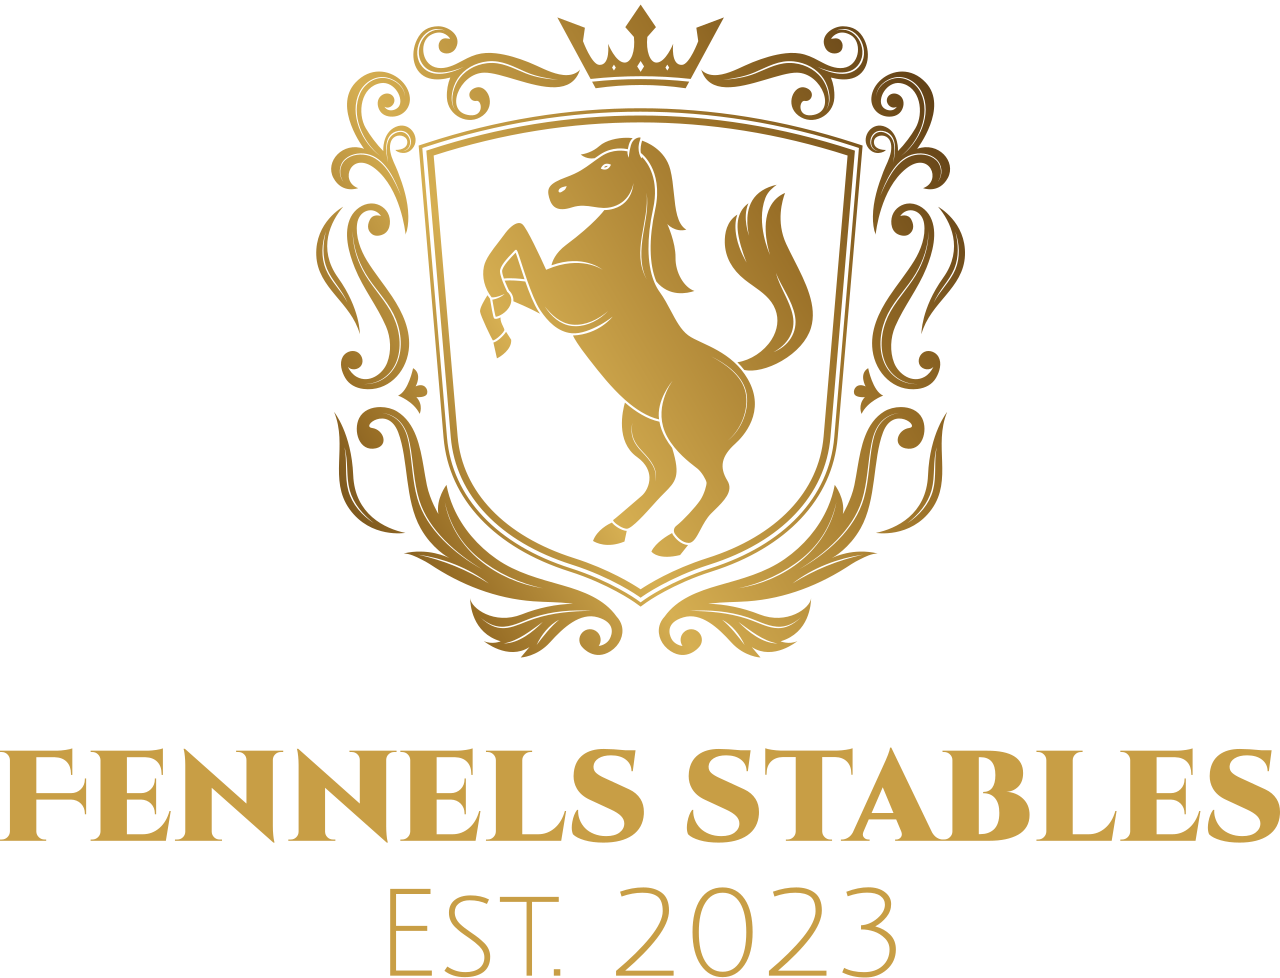 Fennels stables's web page